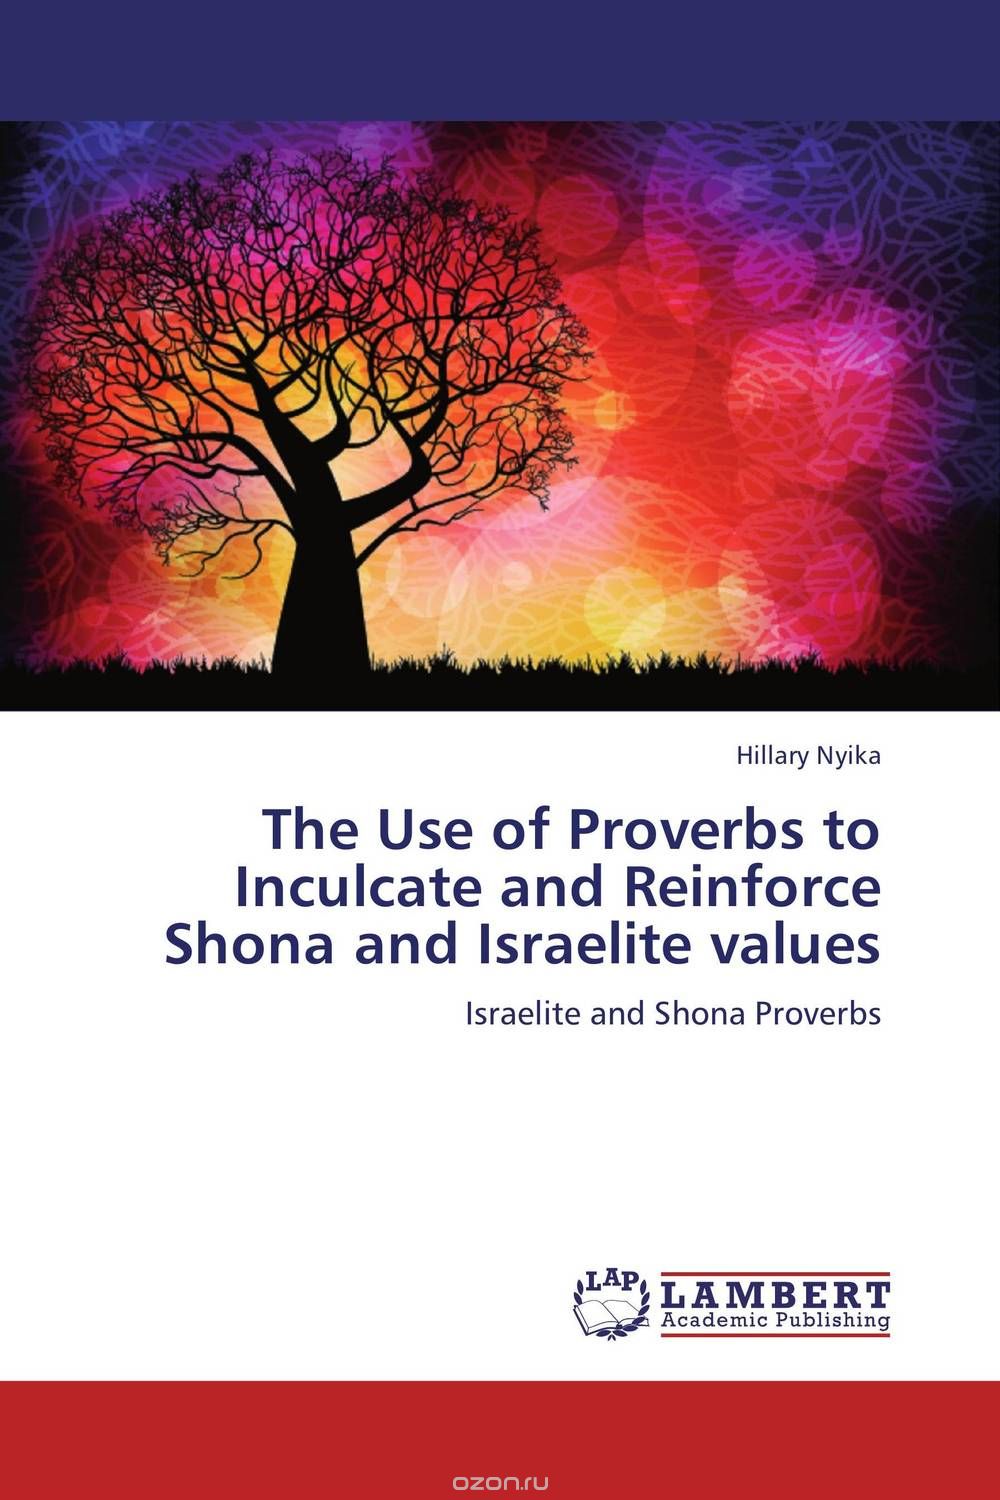 Скачать книгу "The Use of Proverbs to Inculcate and Reinforce Shona and Israelite values"